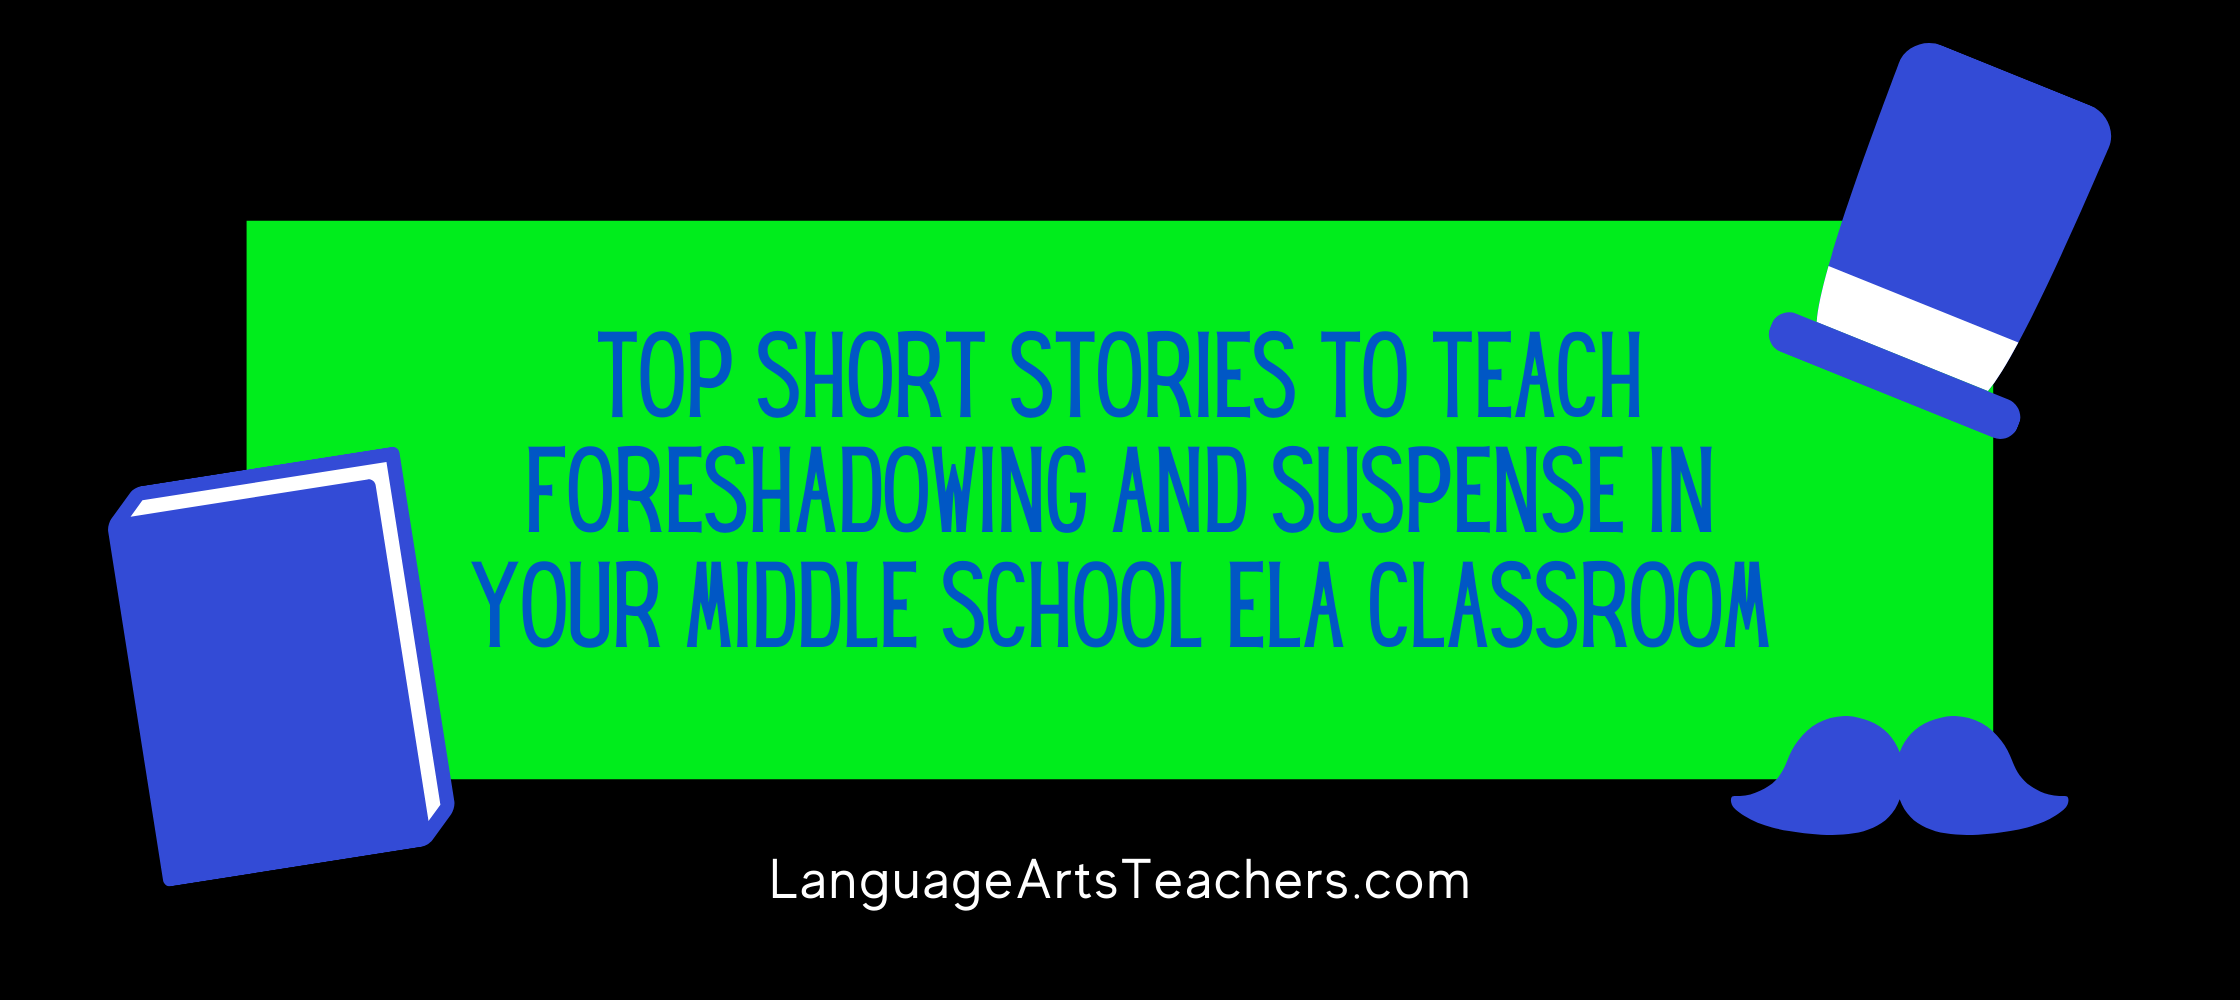 Top Short Stories to Teach Foreshadowing and Suspense in Your Middle School ELA Classroom